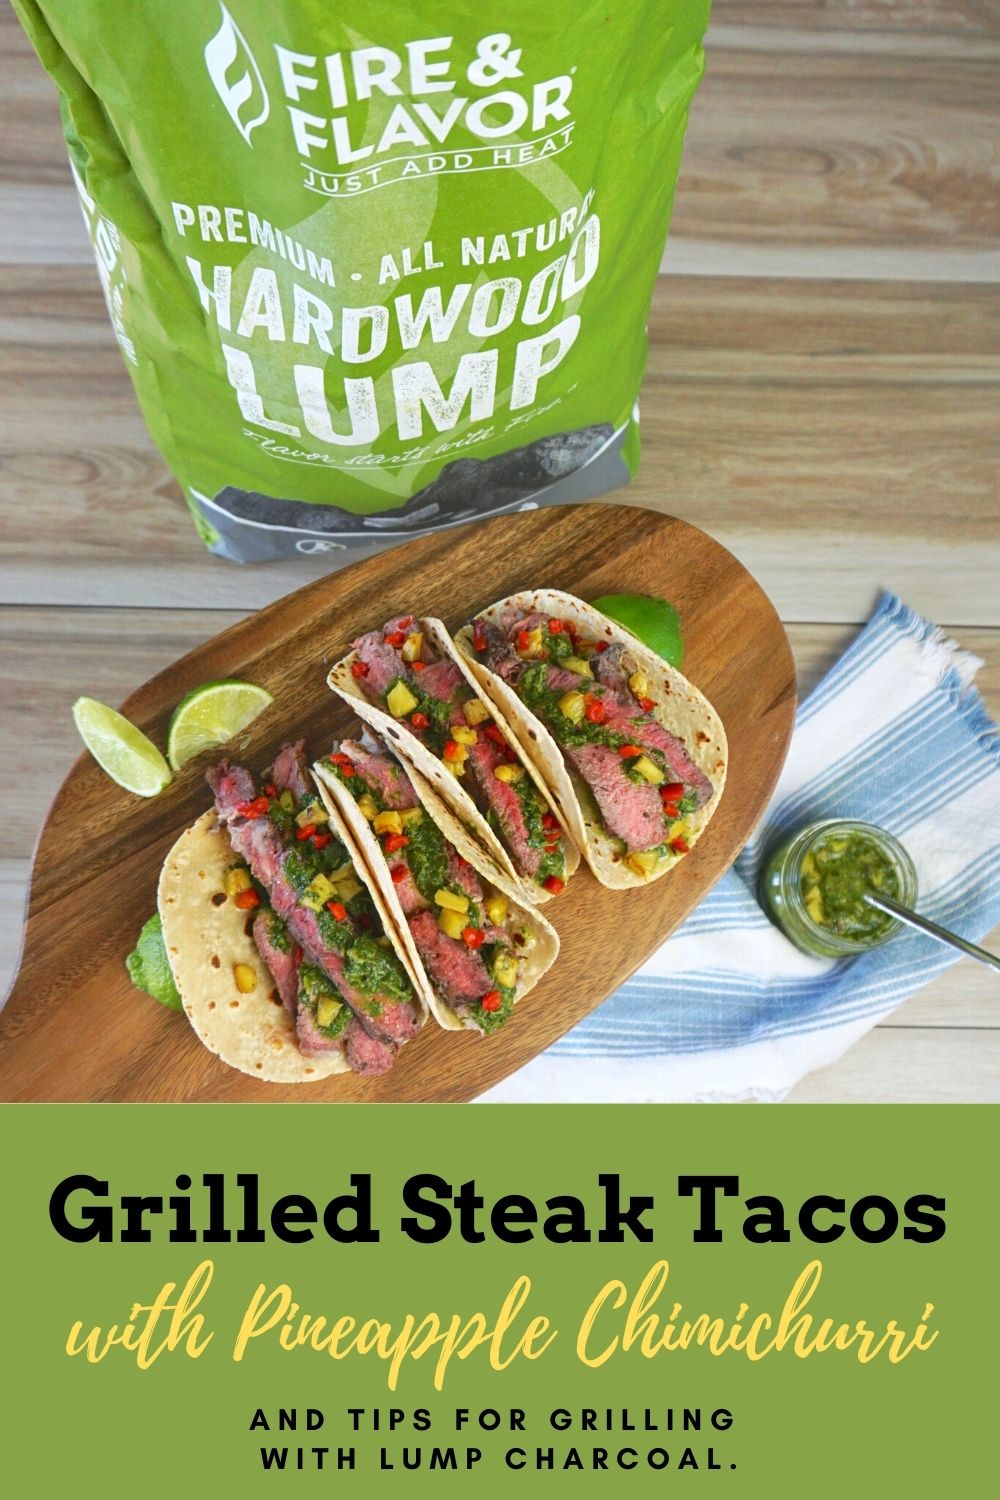 Grilled Steak Tacos With Pineapple Chimichurri